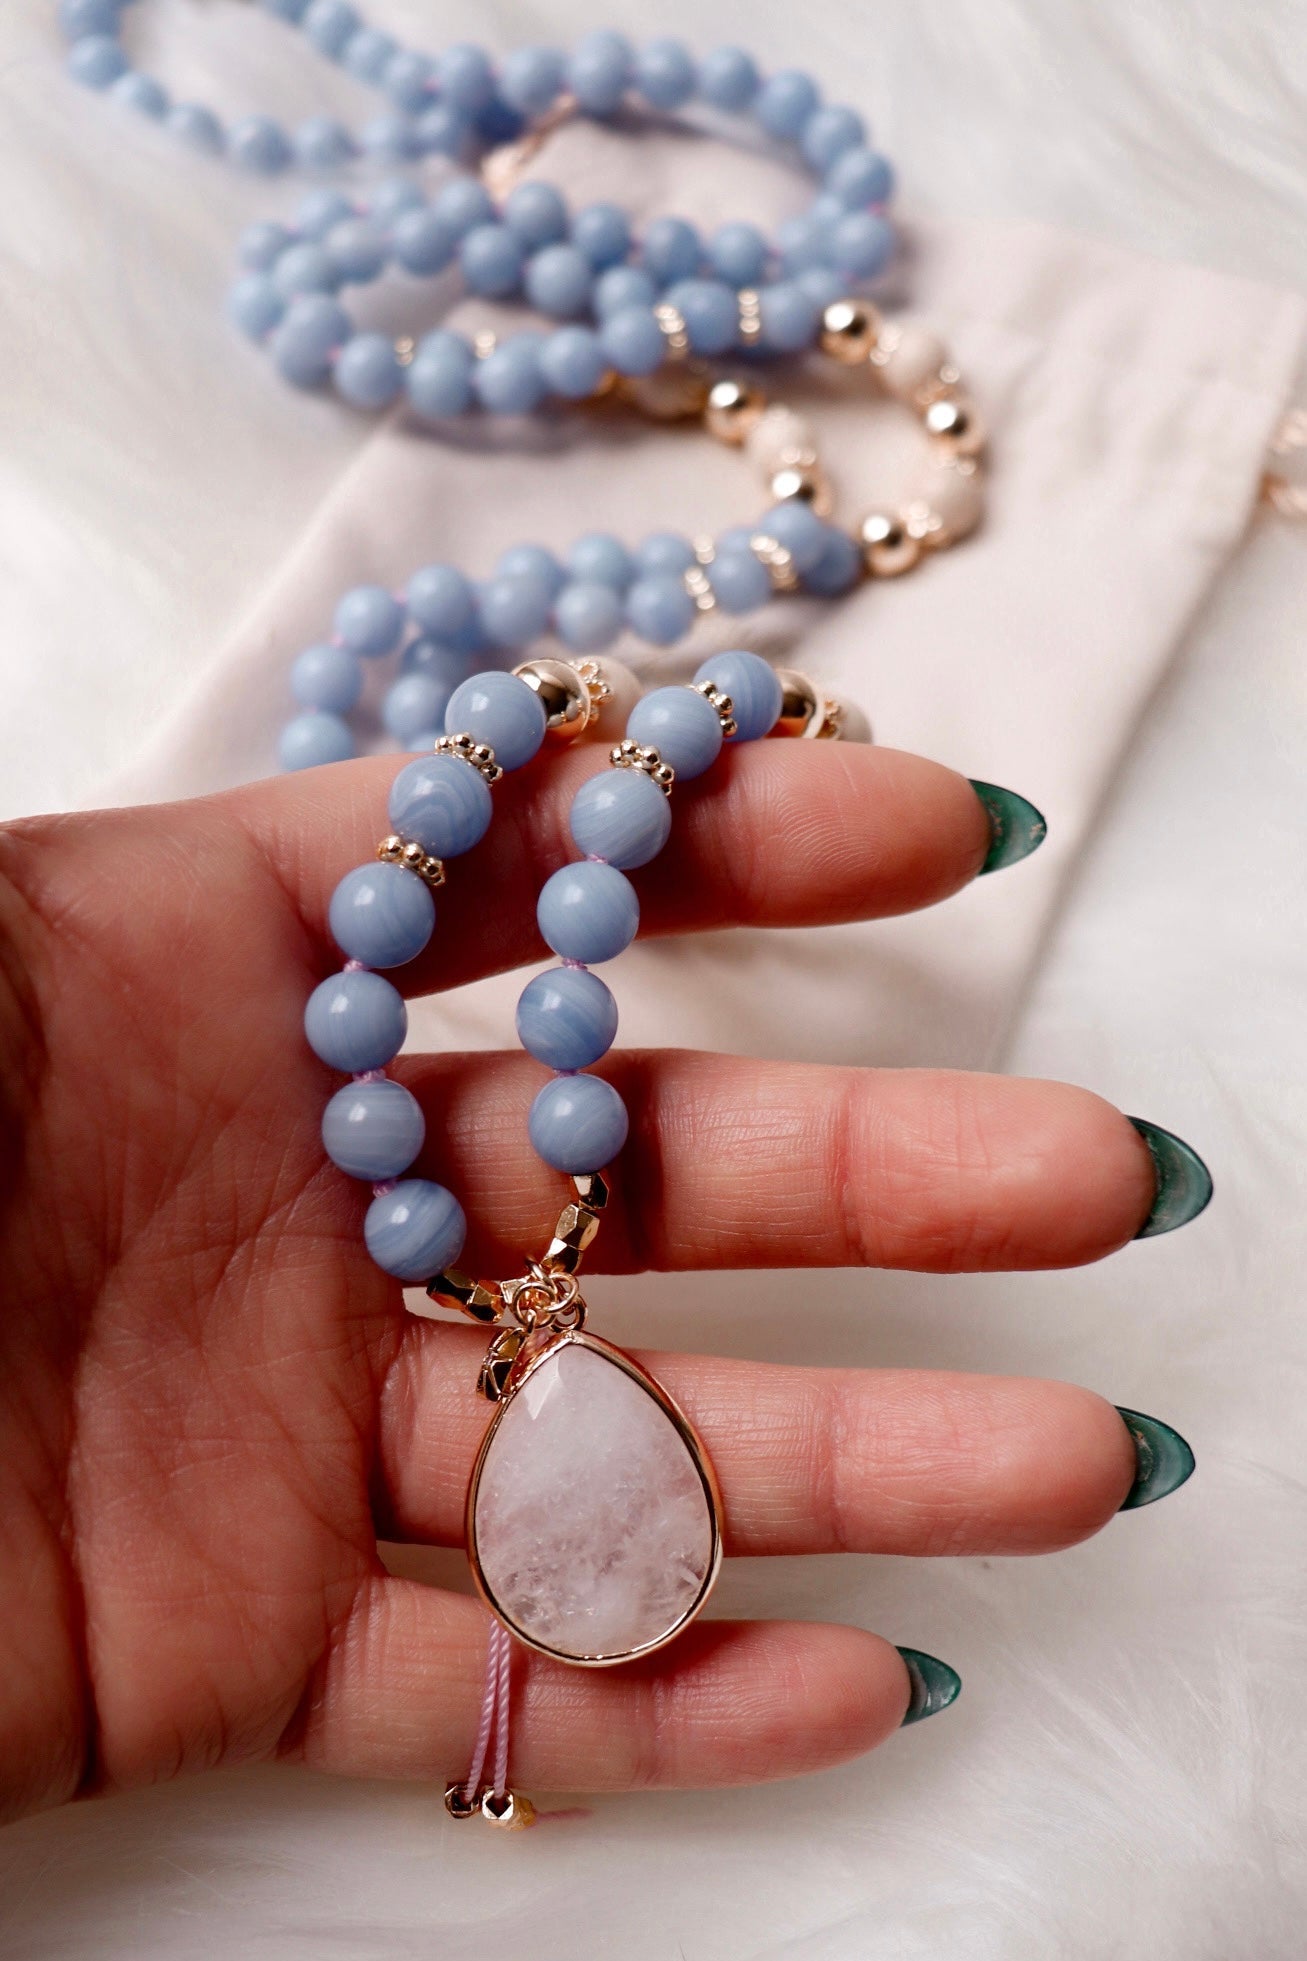 Serenity | blue lace agate mala necklace by Terra Luna Sol